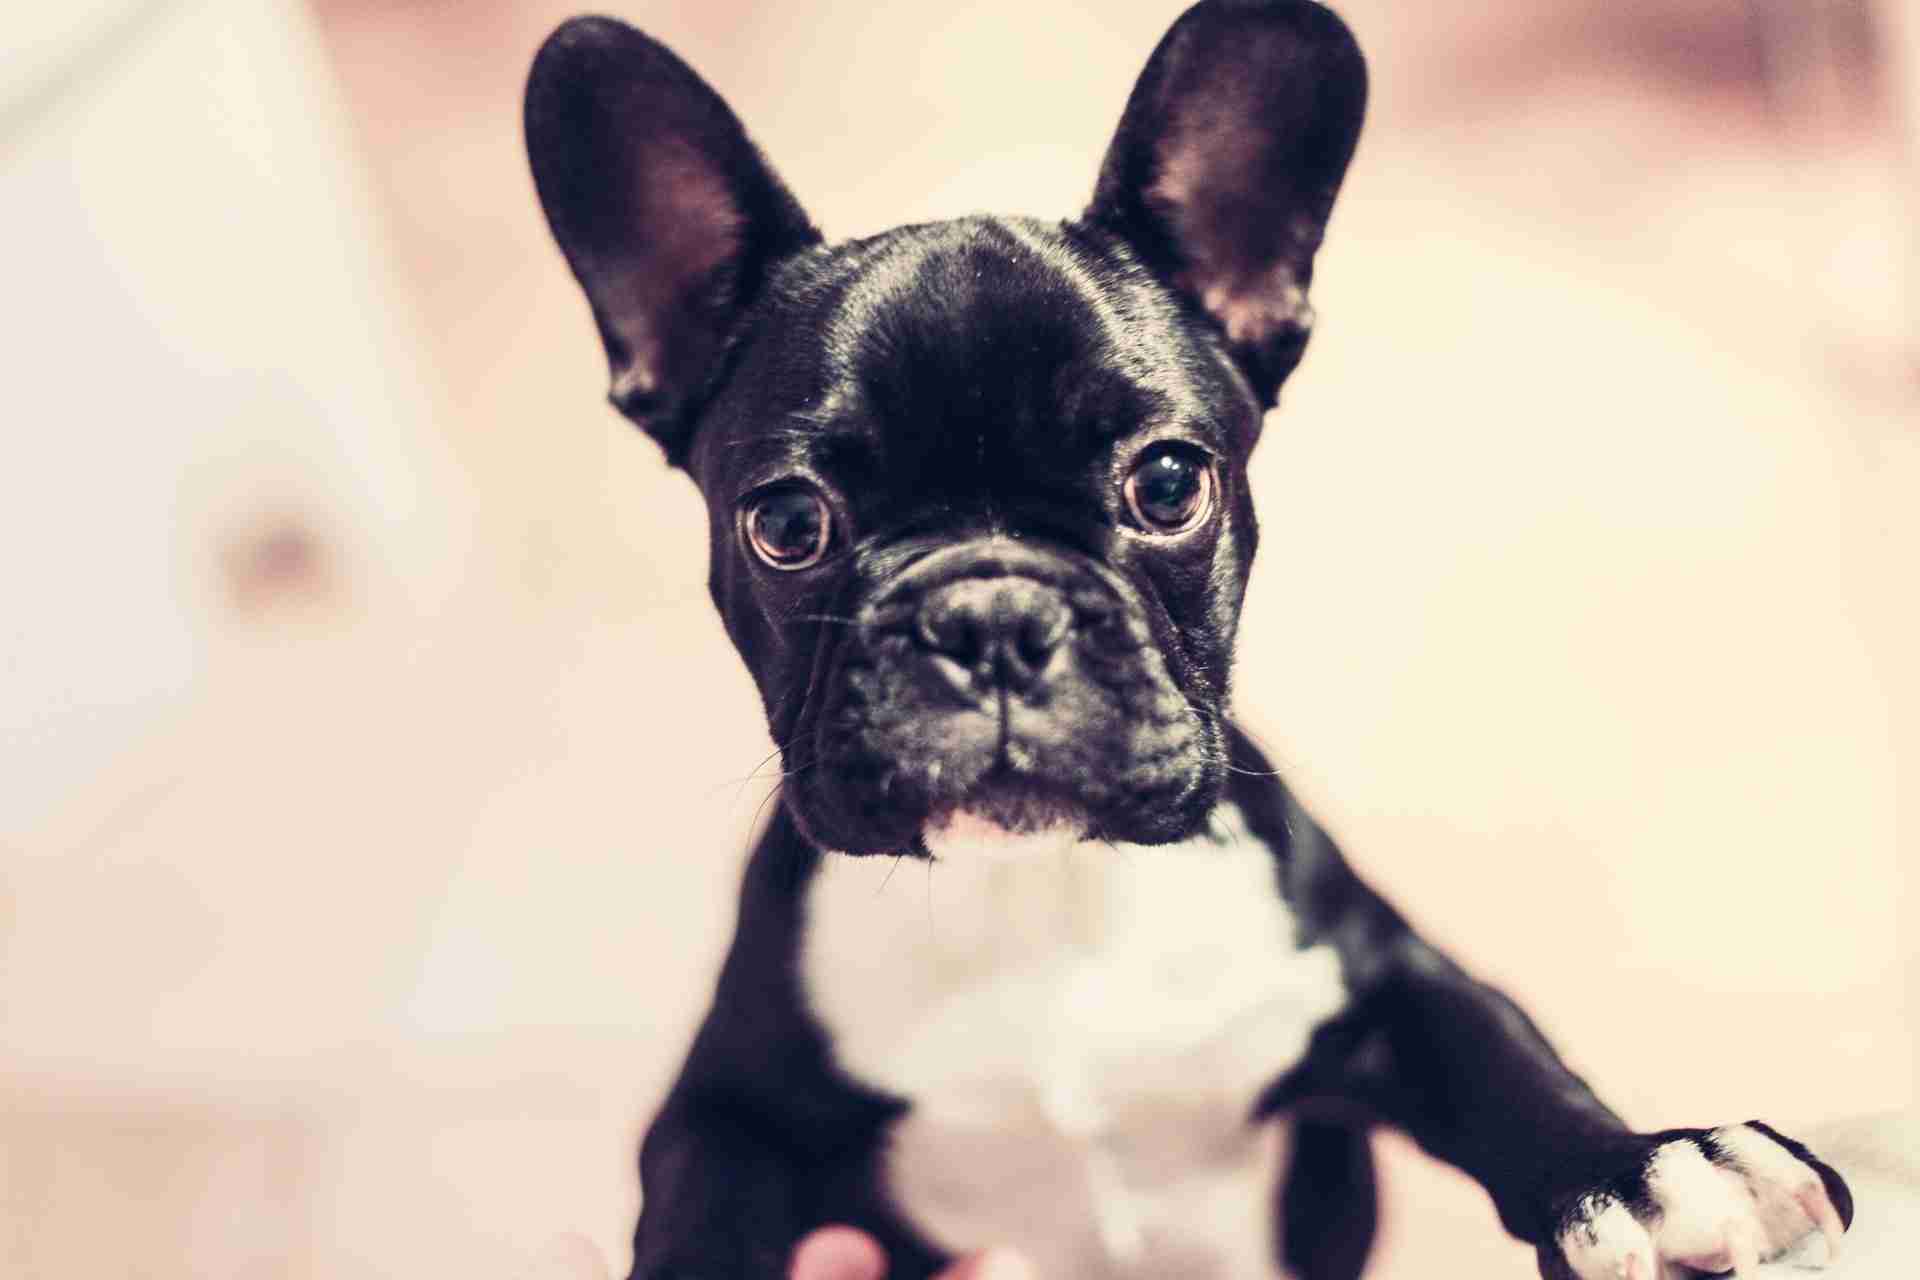 NO! to instant gratification, YES! to choosing a healthy and happy puppy